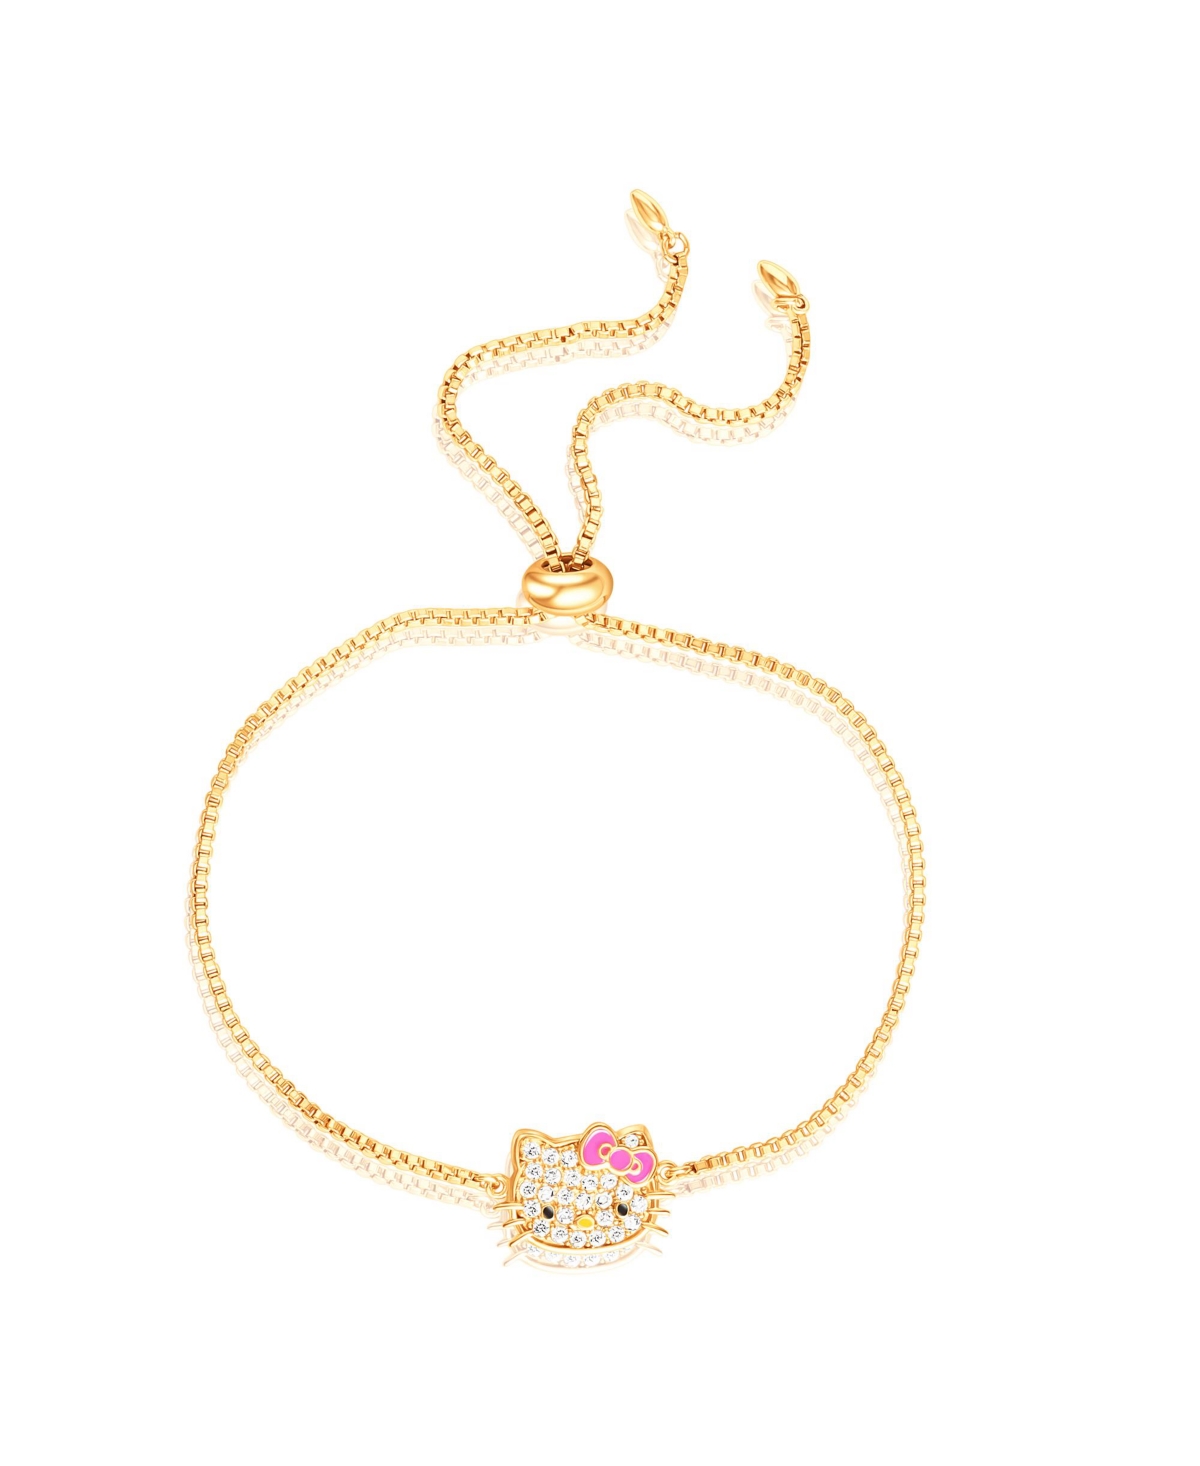 Sanrio Hello Kitty Officially Licensed Authentic Pave Hello Kitty Face Lariat Bracelet - Silver